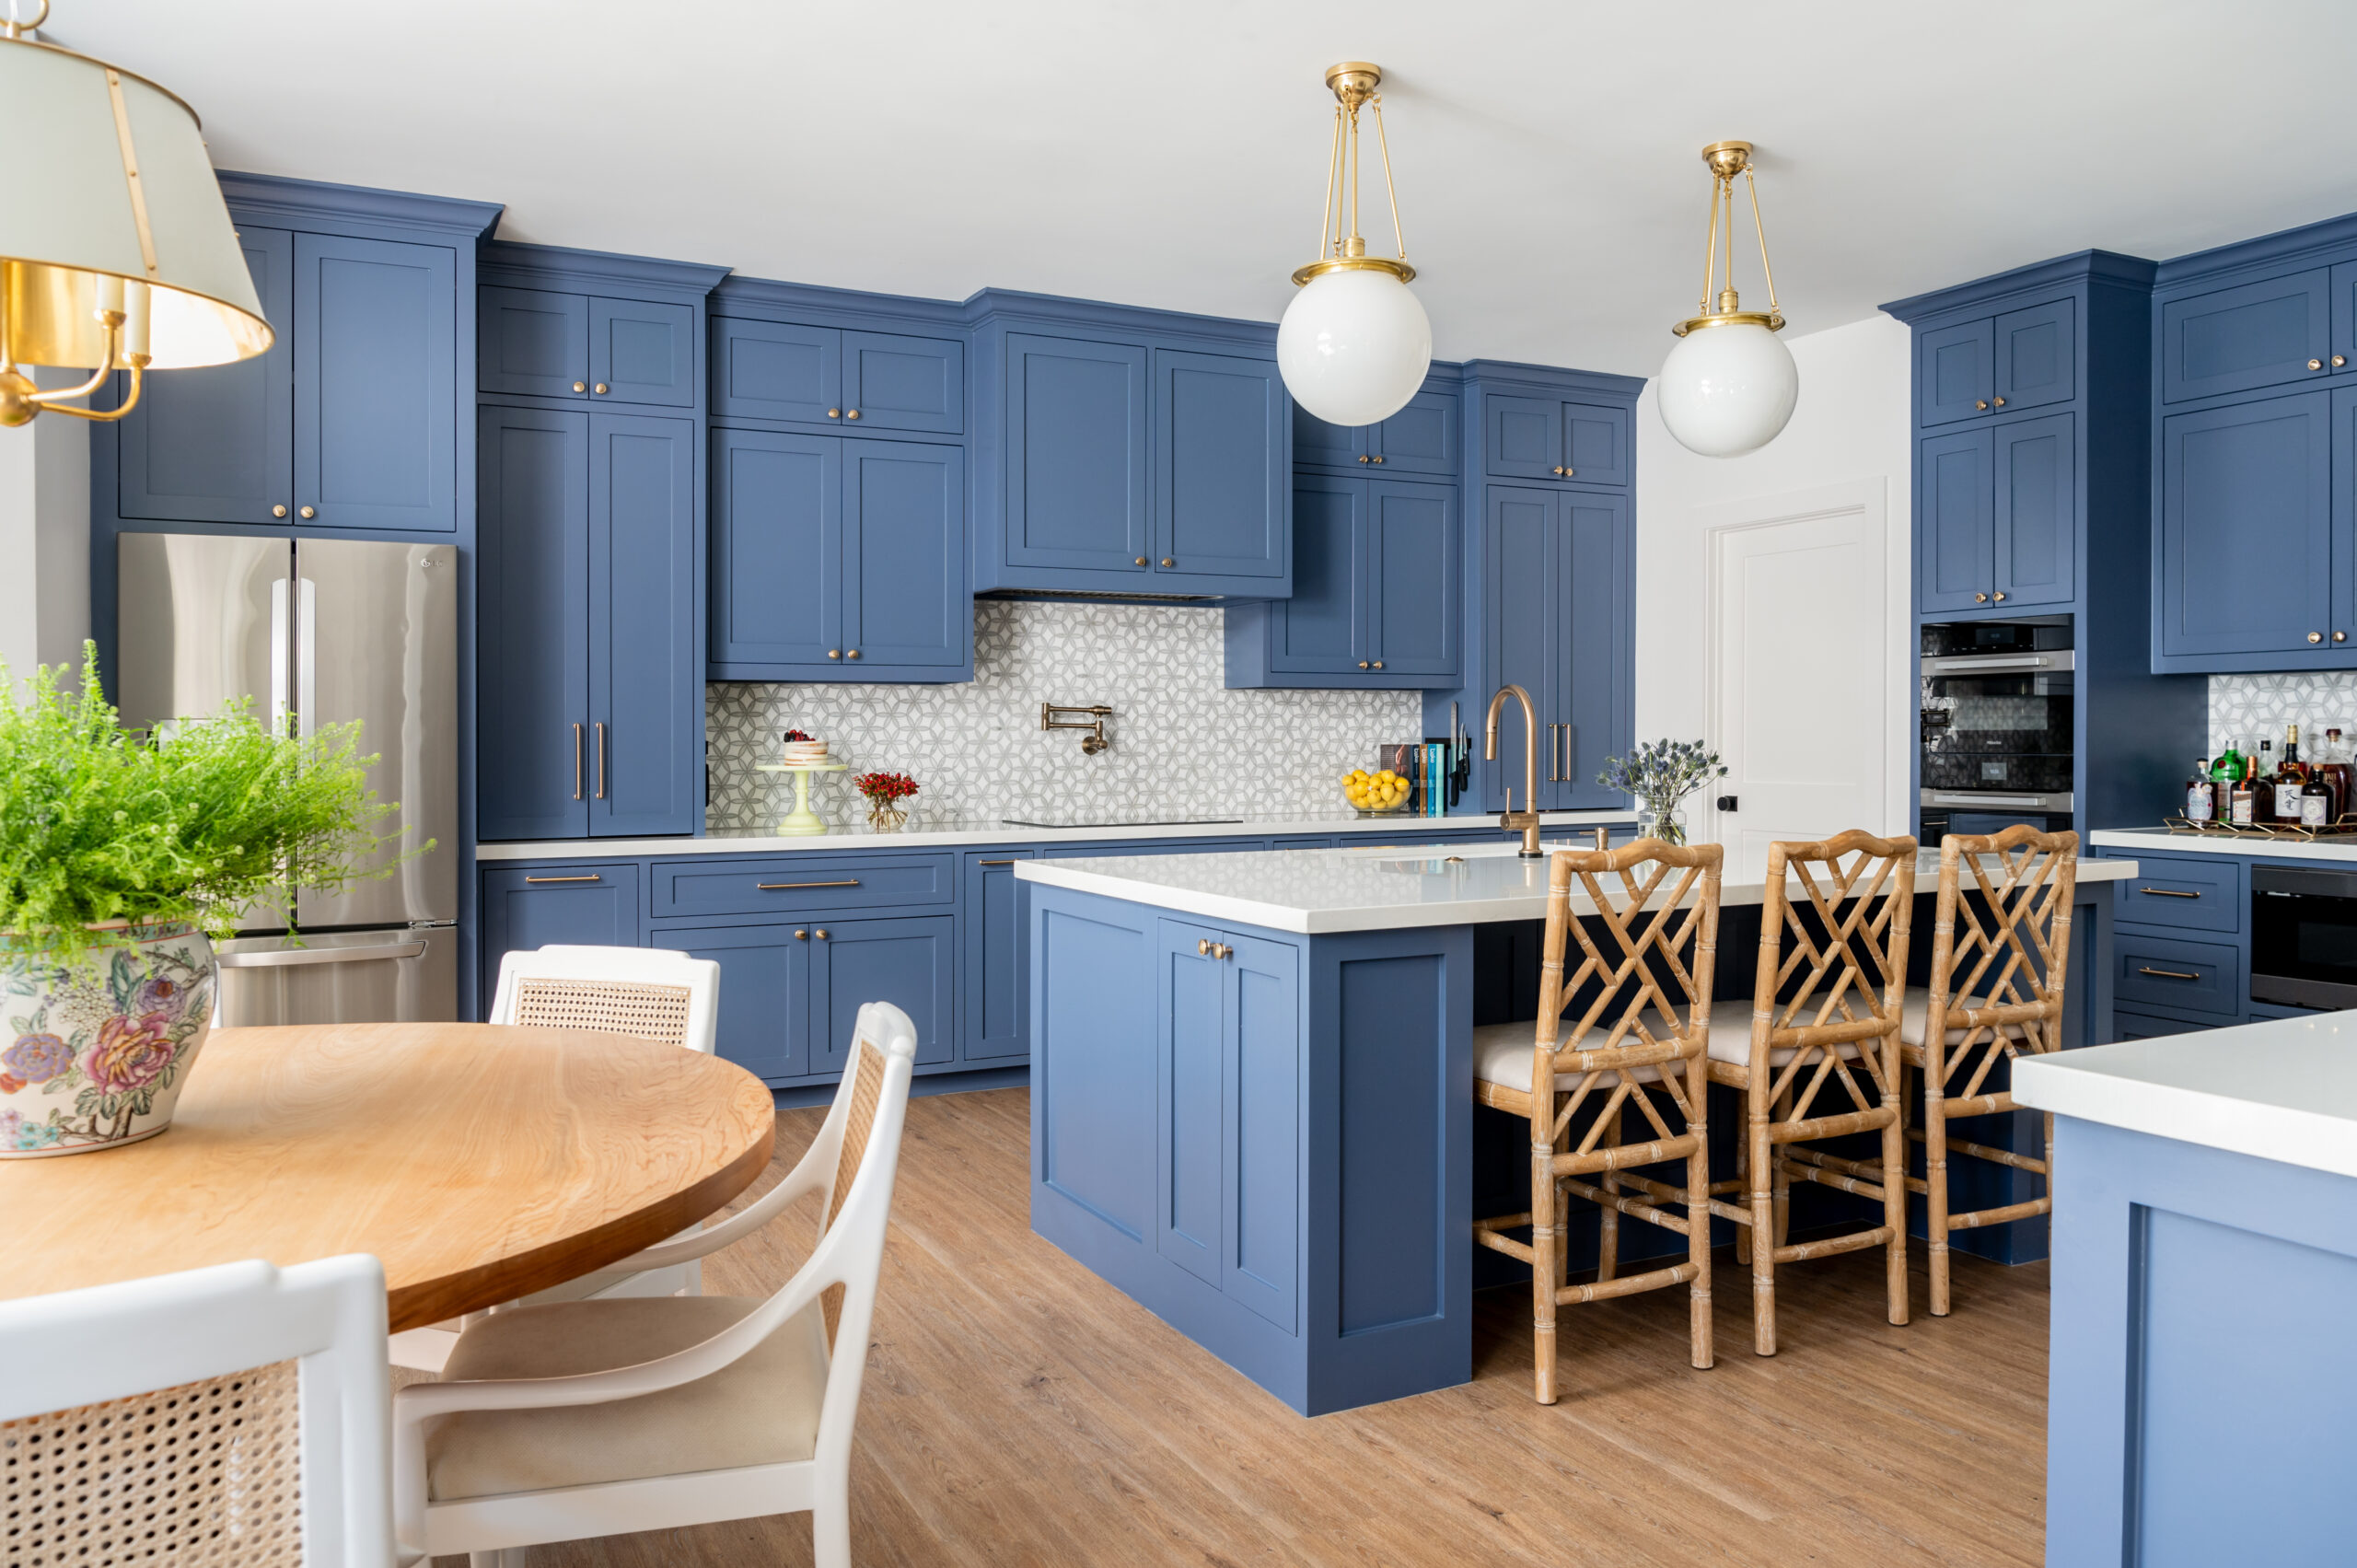 Beautiful bright and blue kitchen interior design for an interior photography shoot